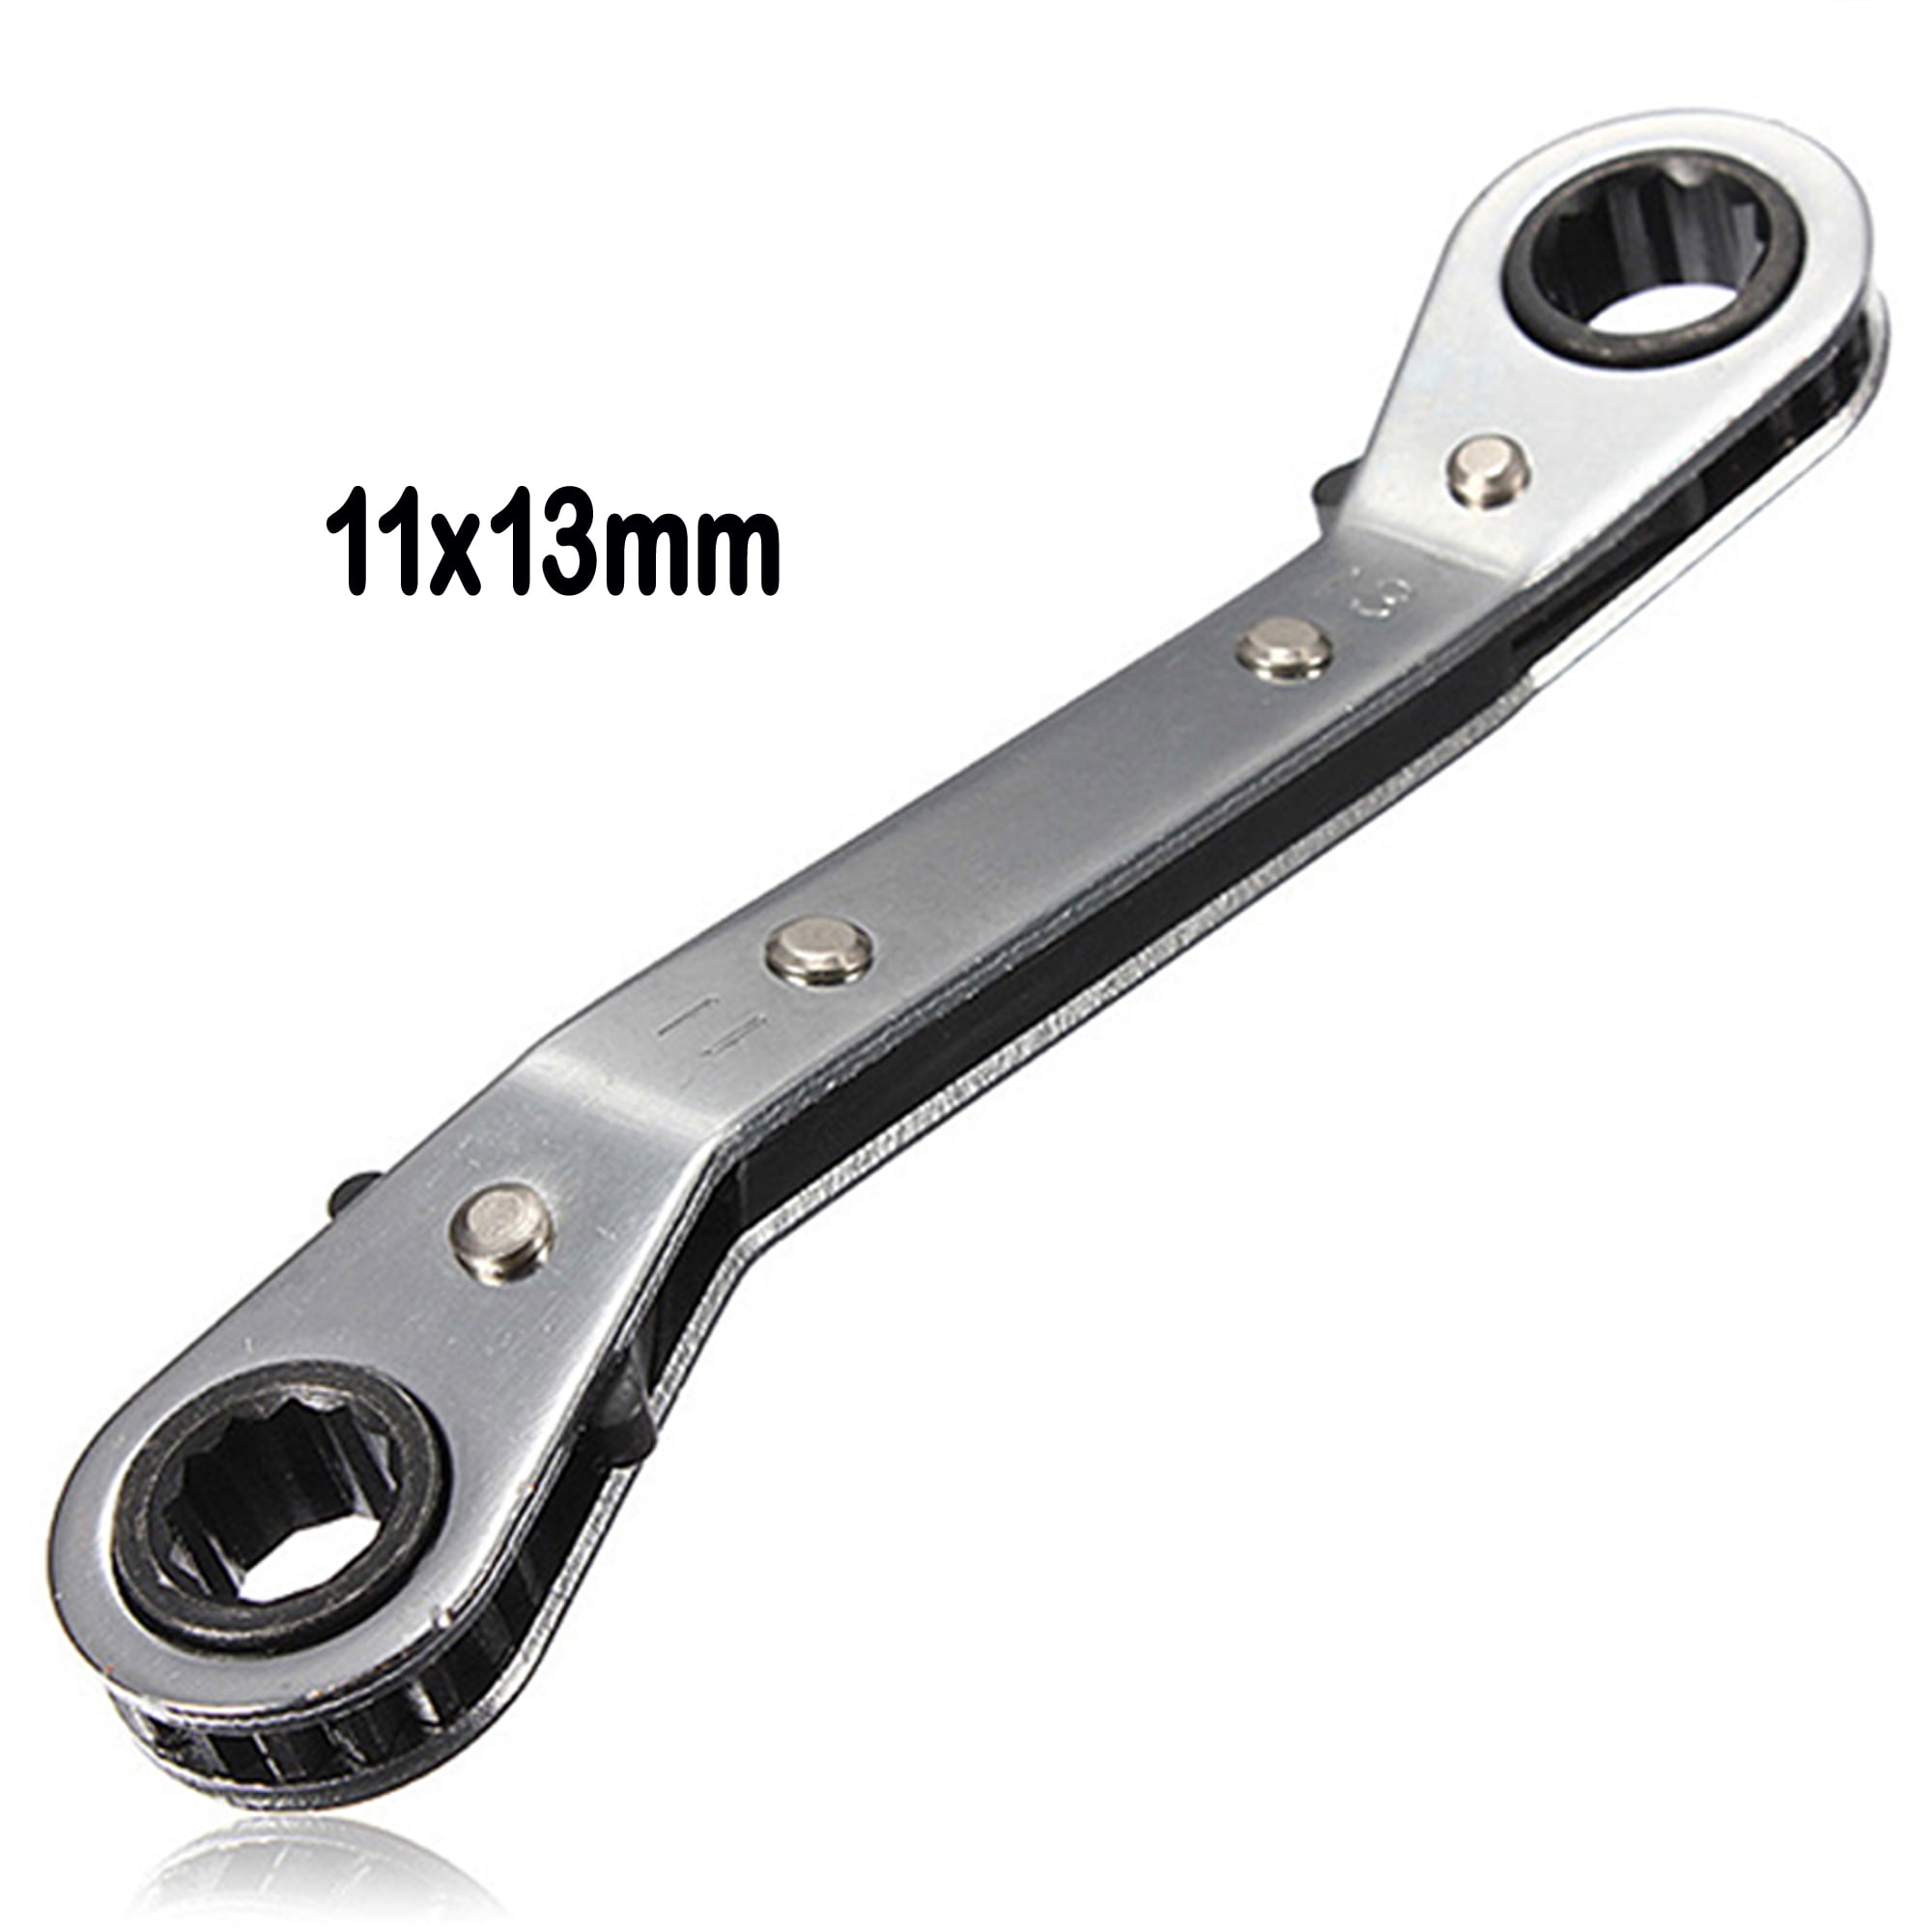 6-32mm Ring Offset Spanner Garage Workshop Tool Deep Double Ended Wrench Metric